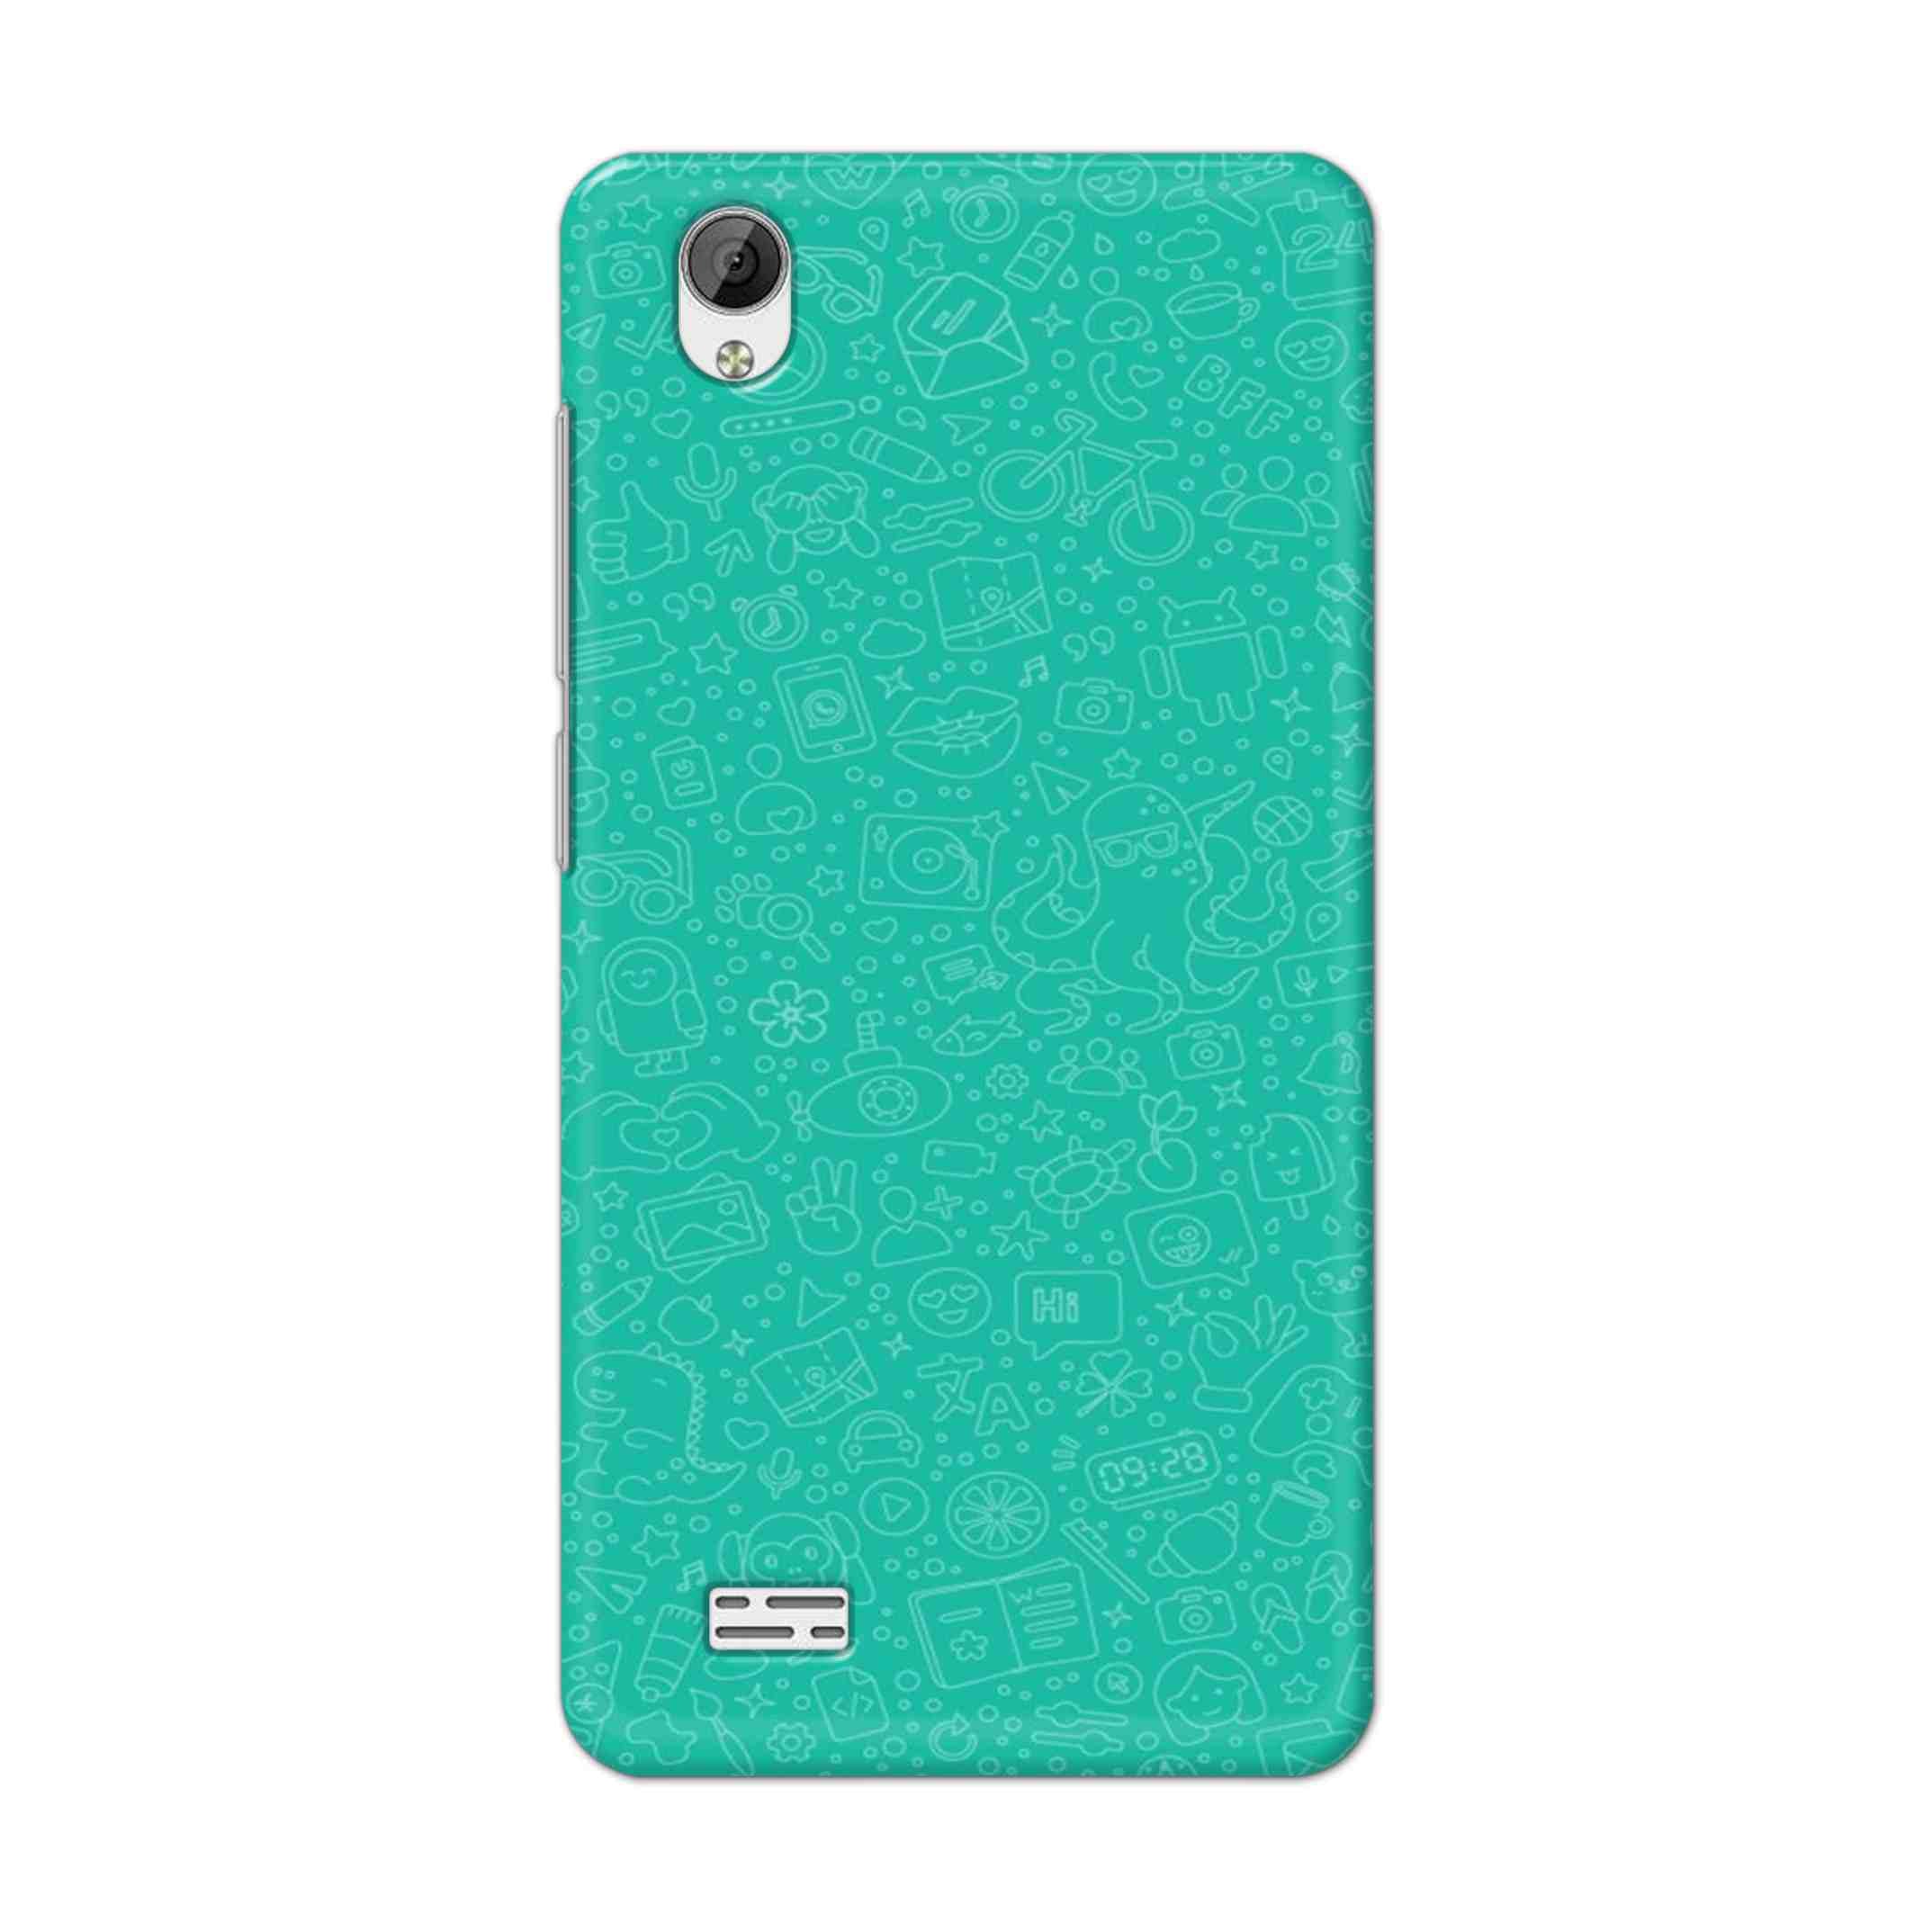 Buy Whatsapp Hard Back Mobile Phone Case Cover For Vivo Y31 Online